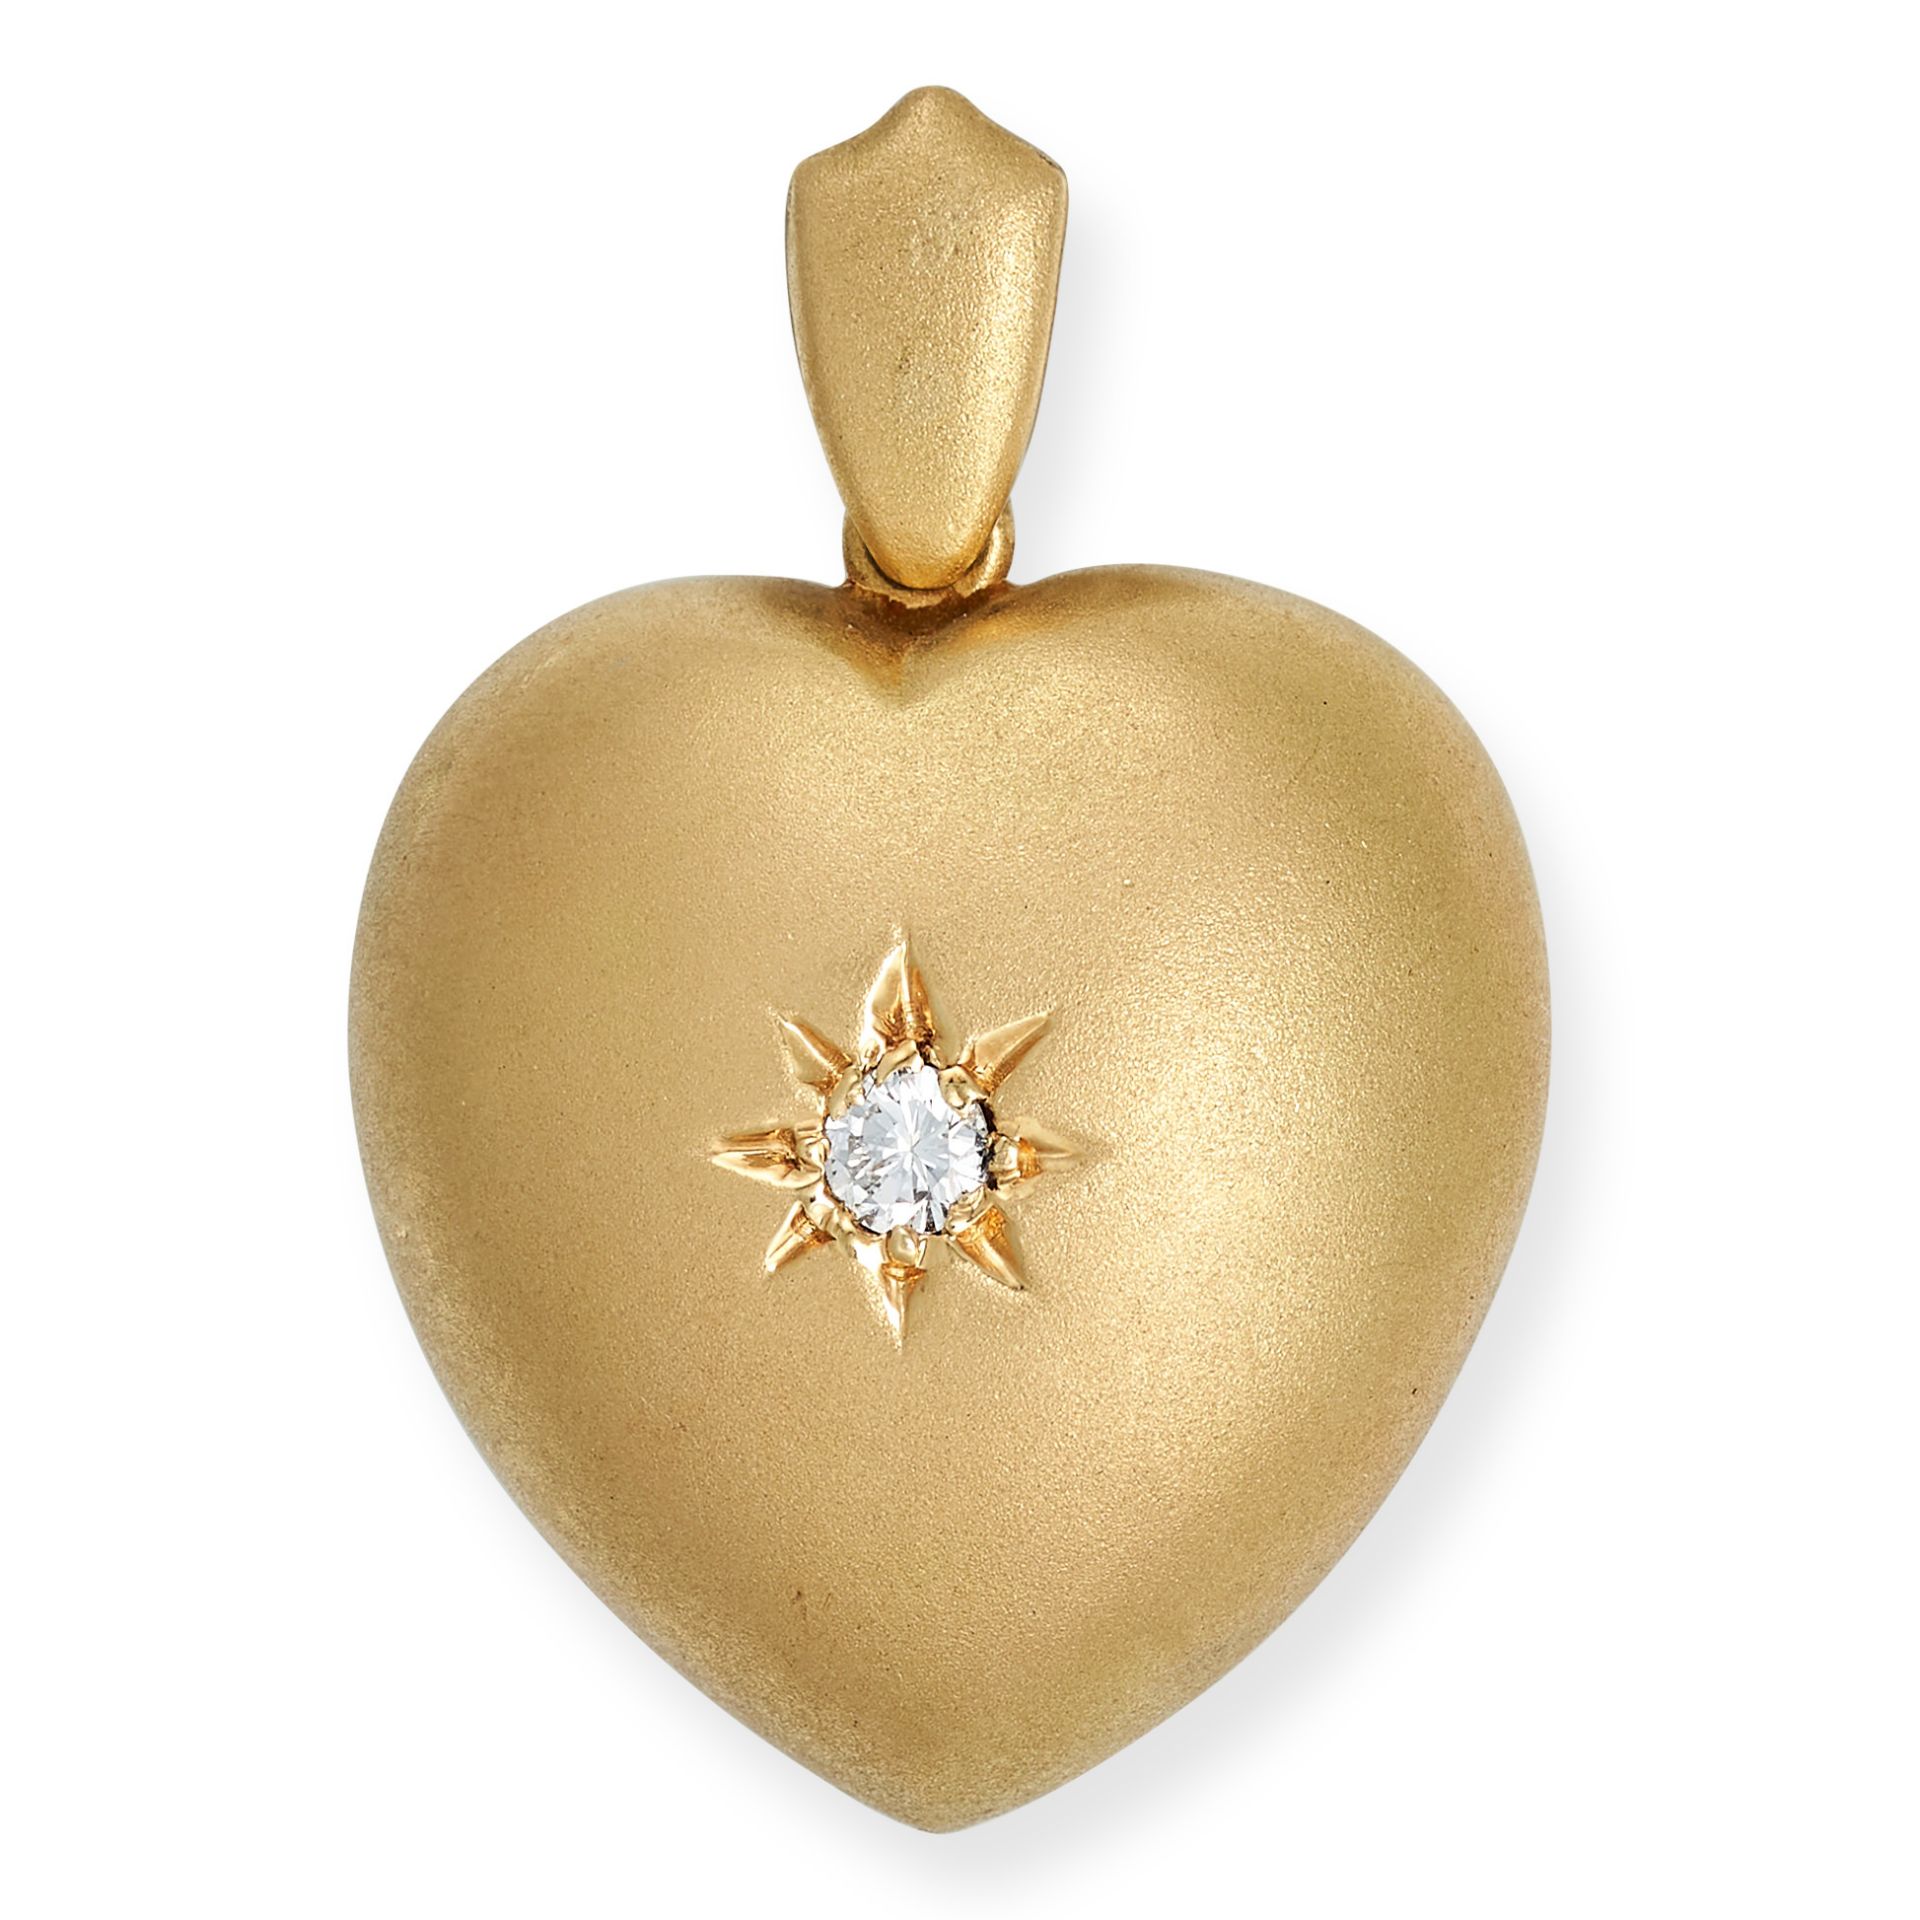 A VINTAGE DIAMOND HEART CHARM / PENDANT in 18ct yellow gold, designed as a heart, set with a roun...